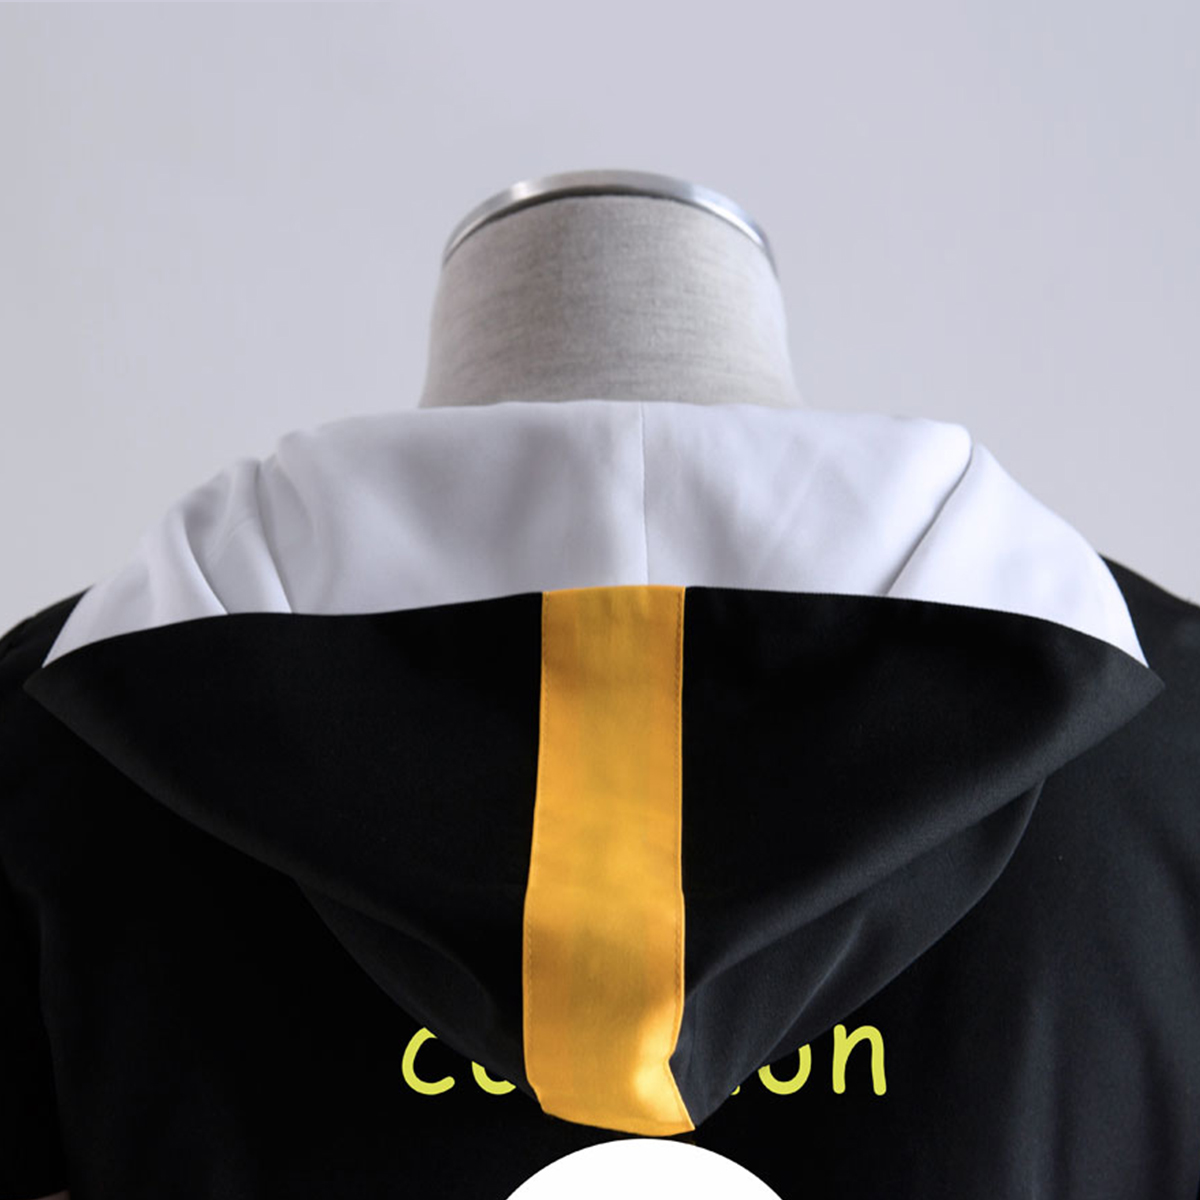 One Piece Surgeon of Death Trafalgar Law 1 Anime Cosplay Costumes Outfit